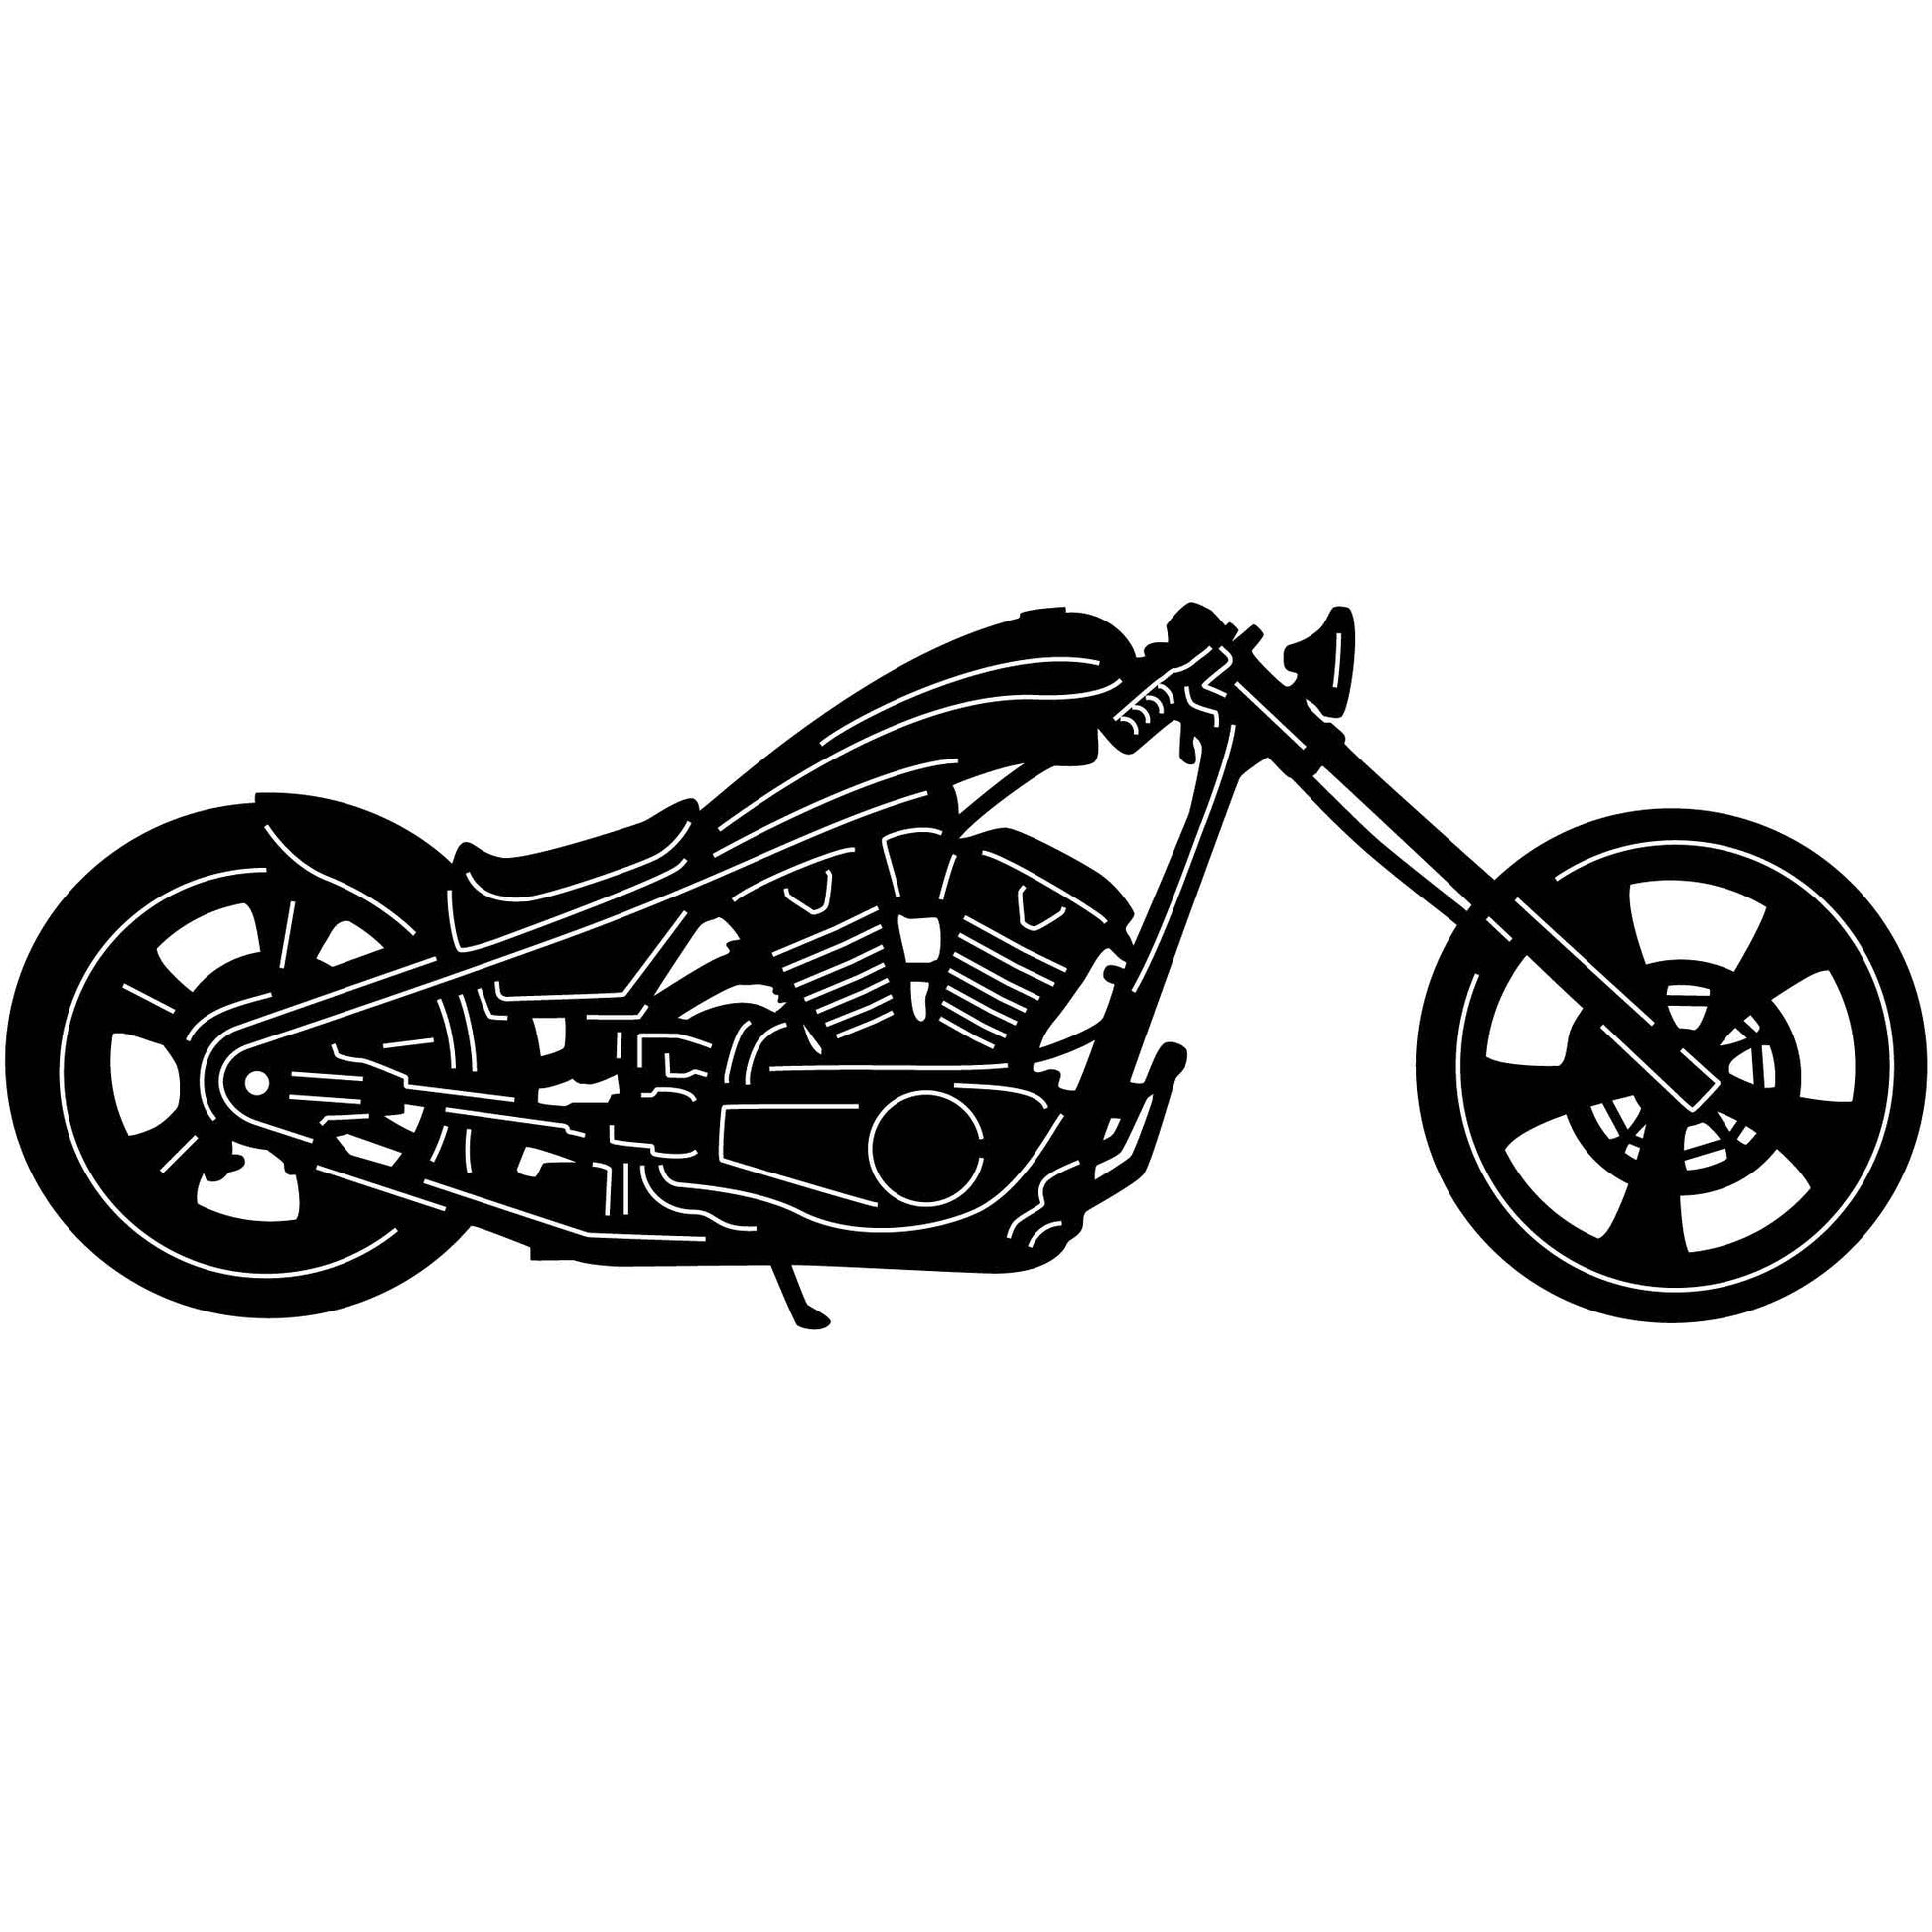 Motorcycle 005 DXF File Cut Ready for CNC